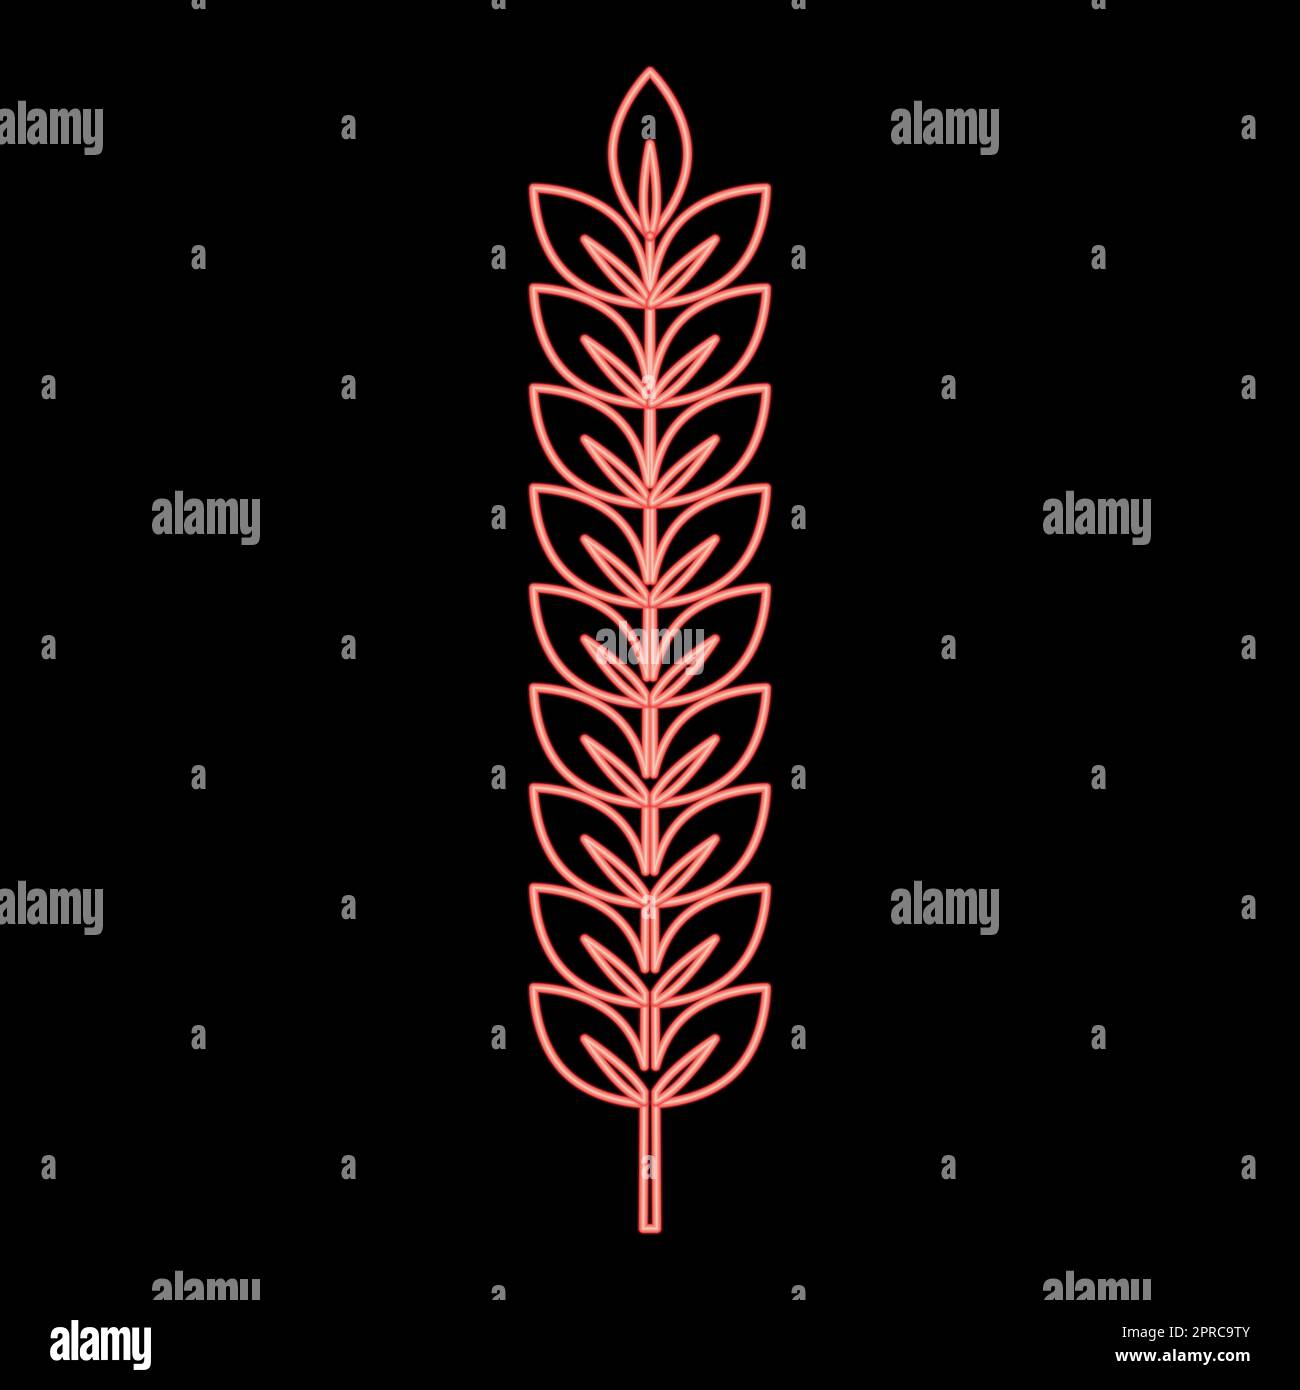 Neon spikelet of wheat Plant branch red color vector illustration image flat style Stock Vector